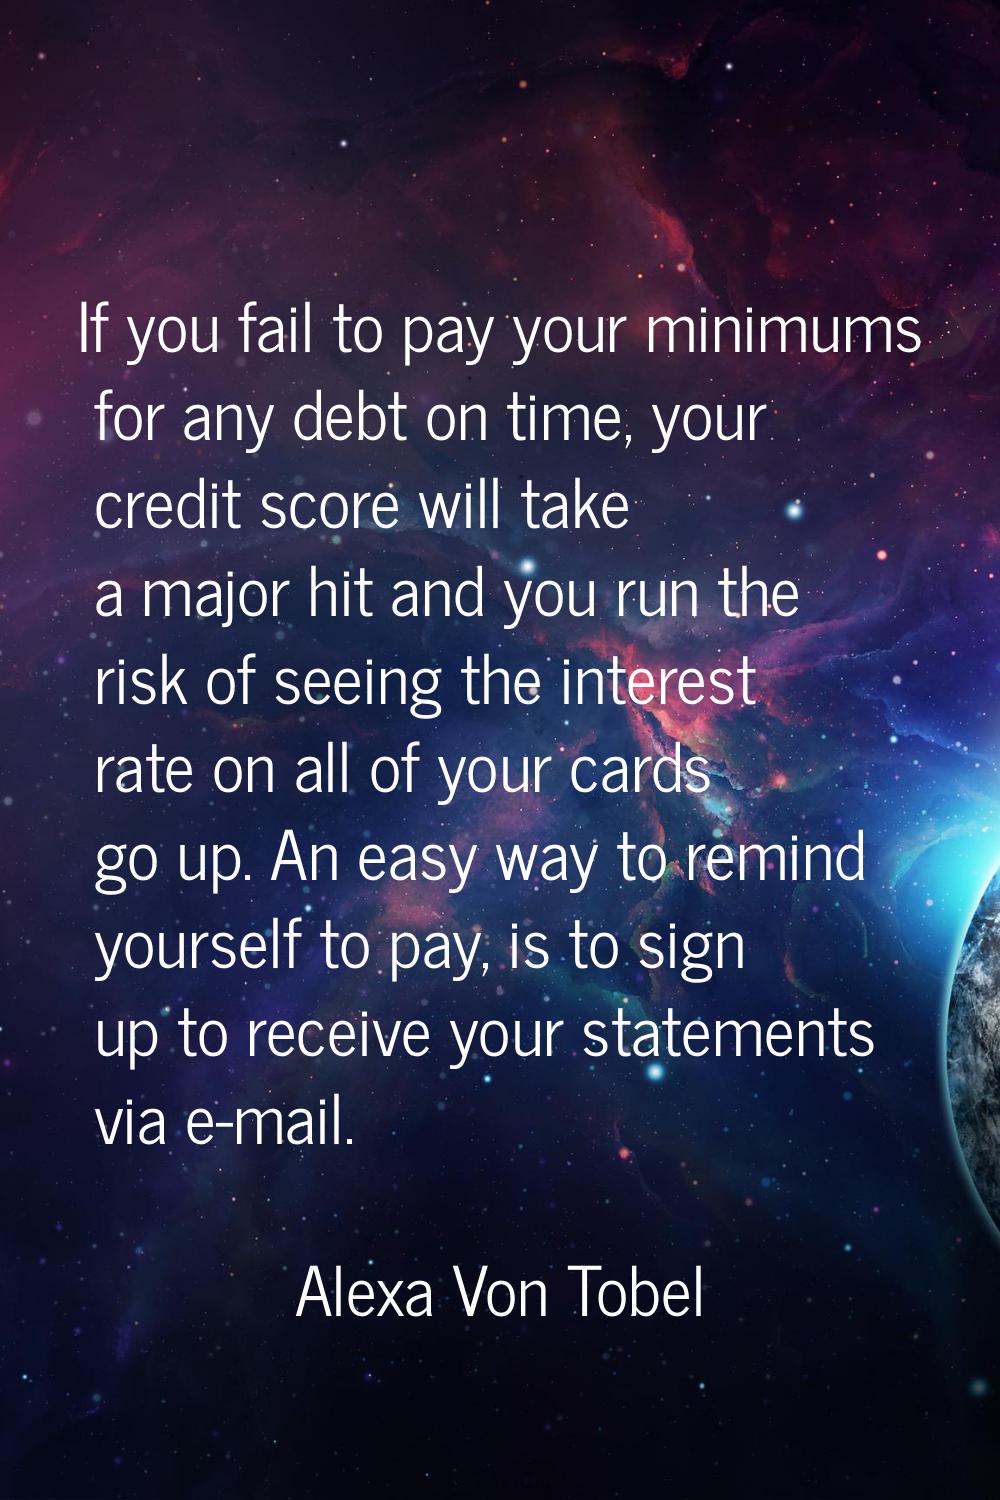 If you fail to pay your minimums for any debt on time, your credit score will take a major hit and 